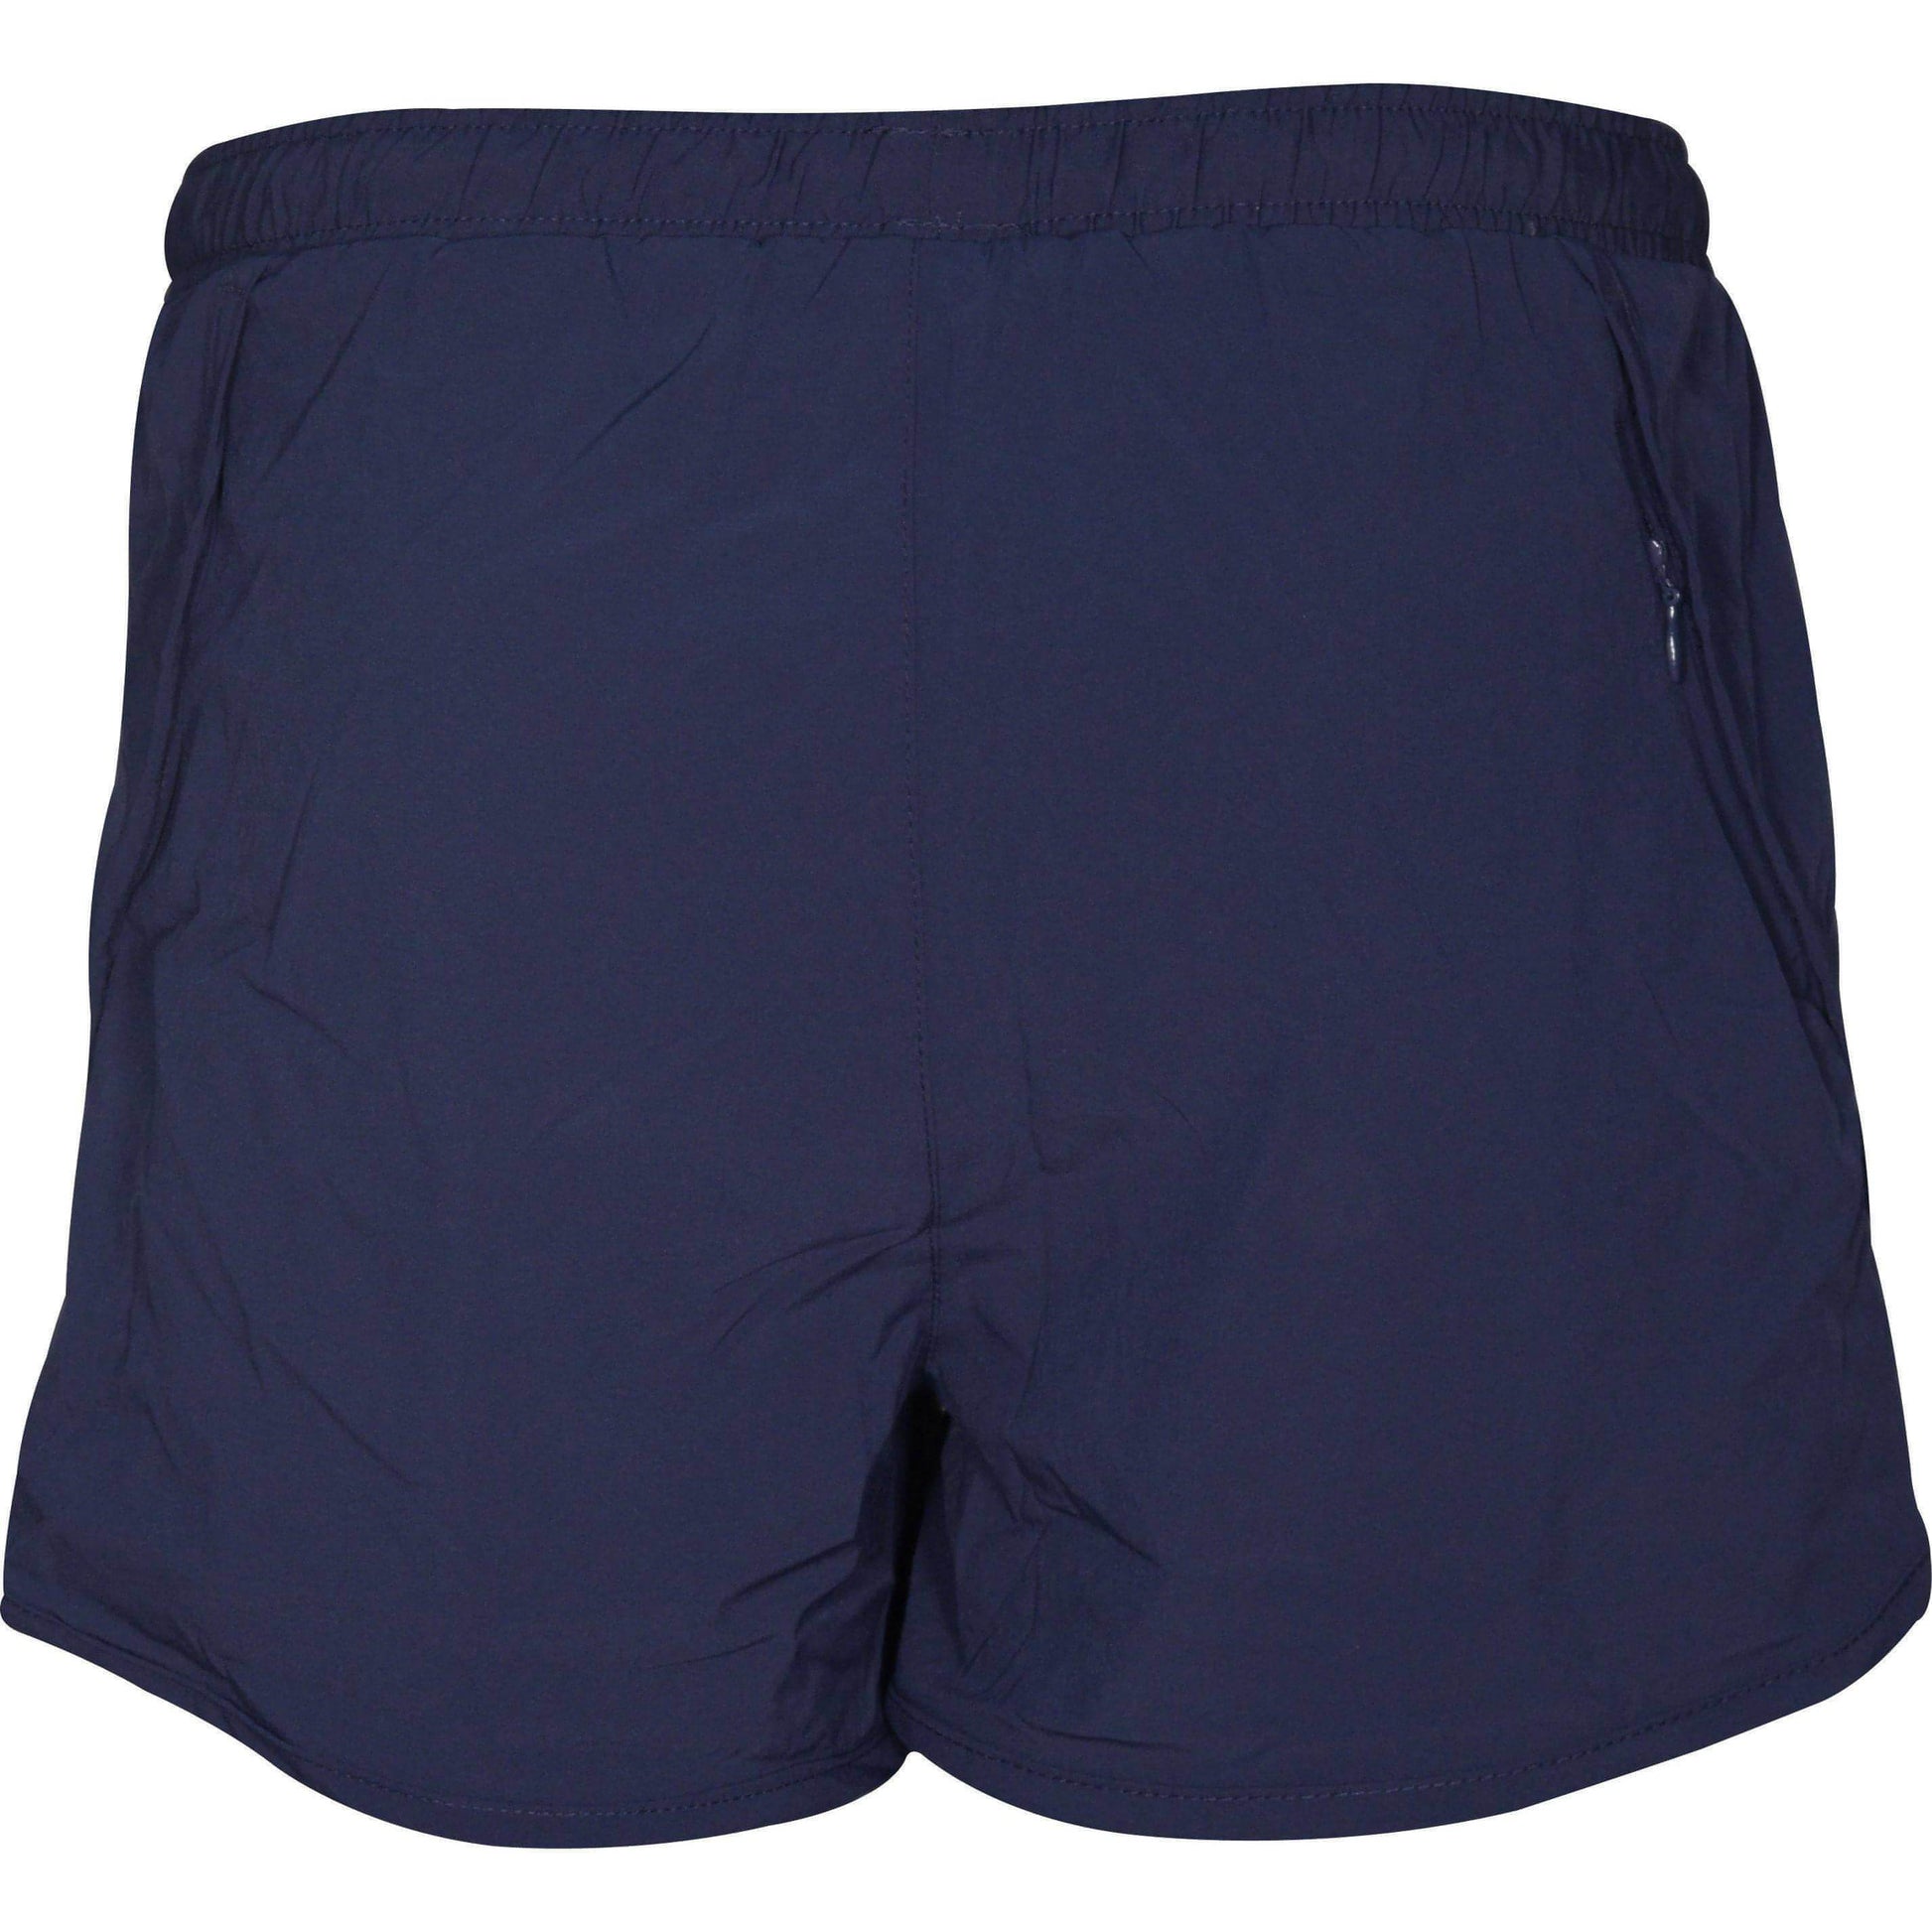 More Mile Conquer 2 in 1 Womens Running Shorts - Navy - Start Fitness